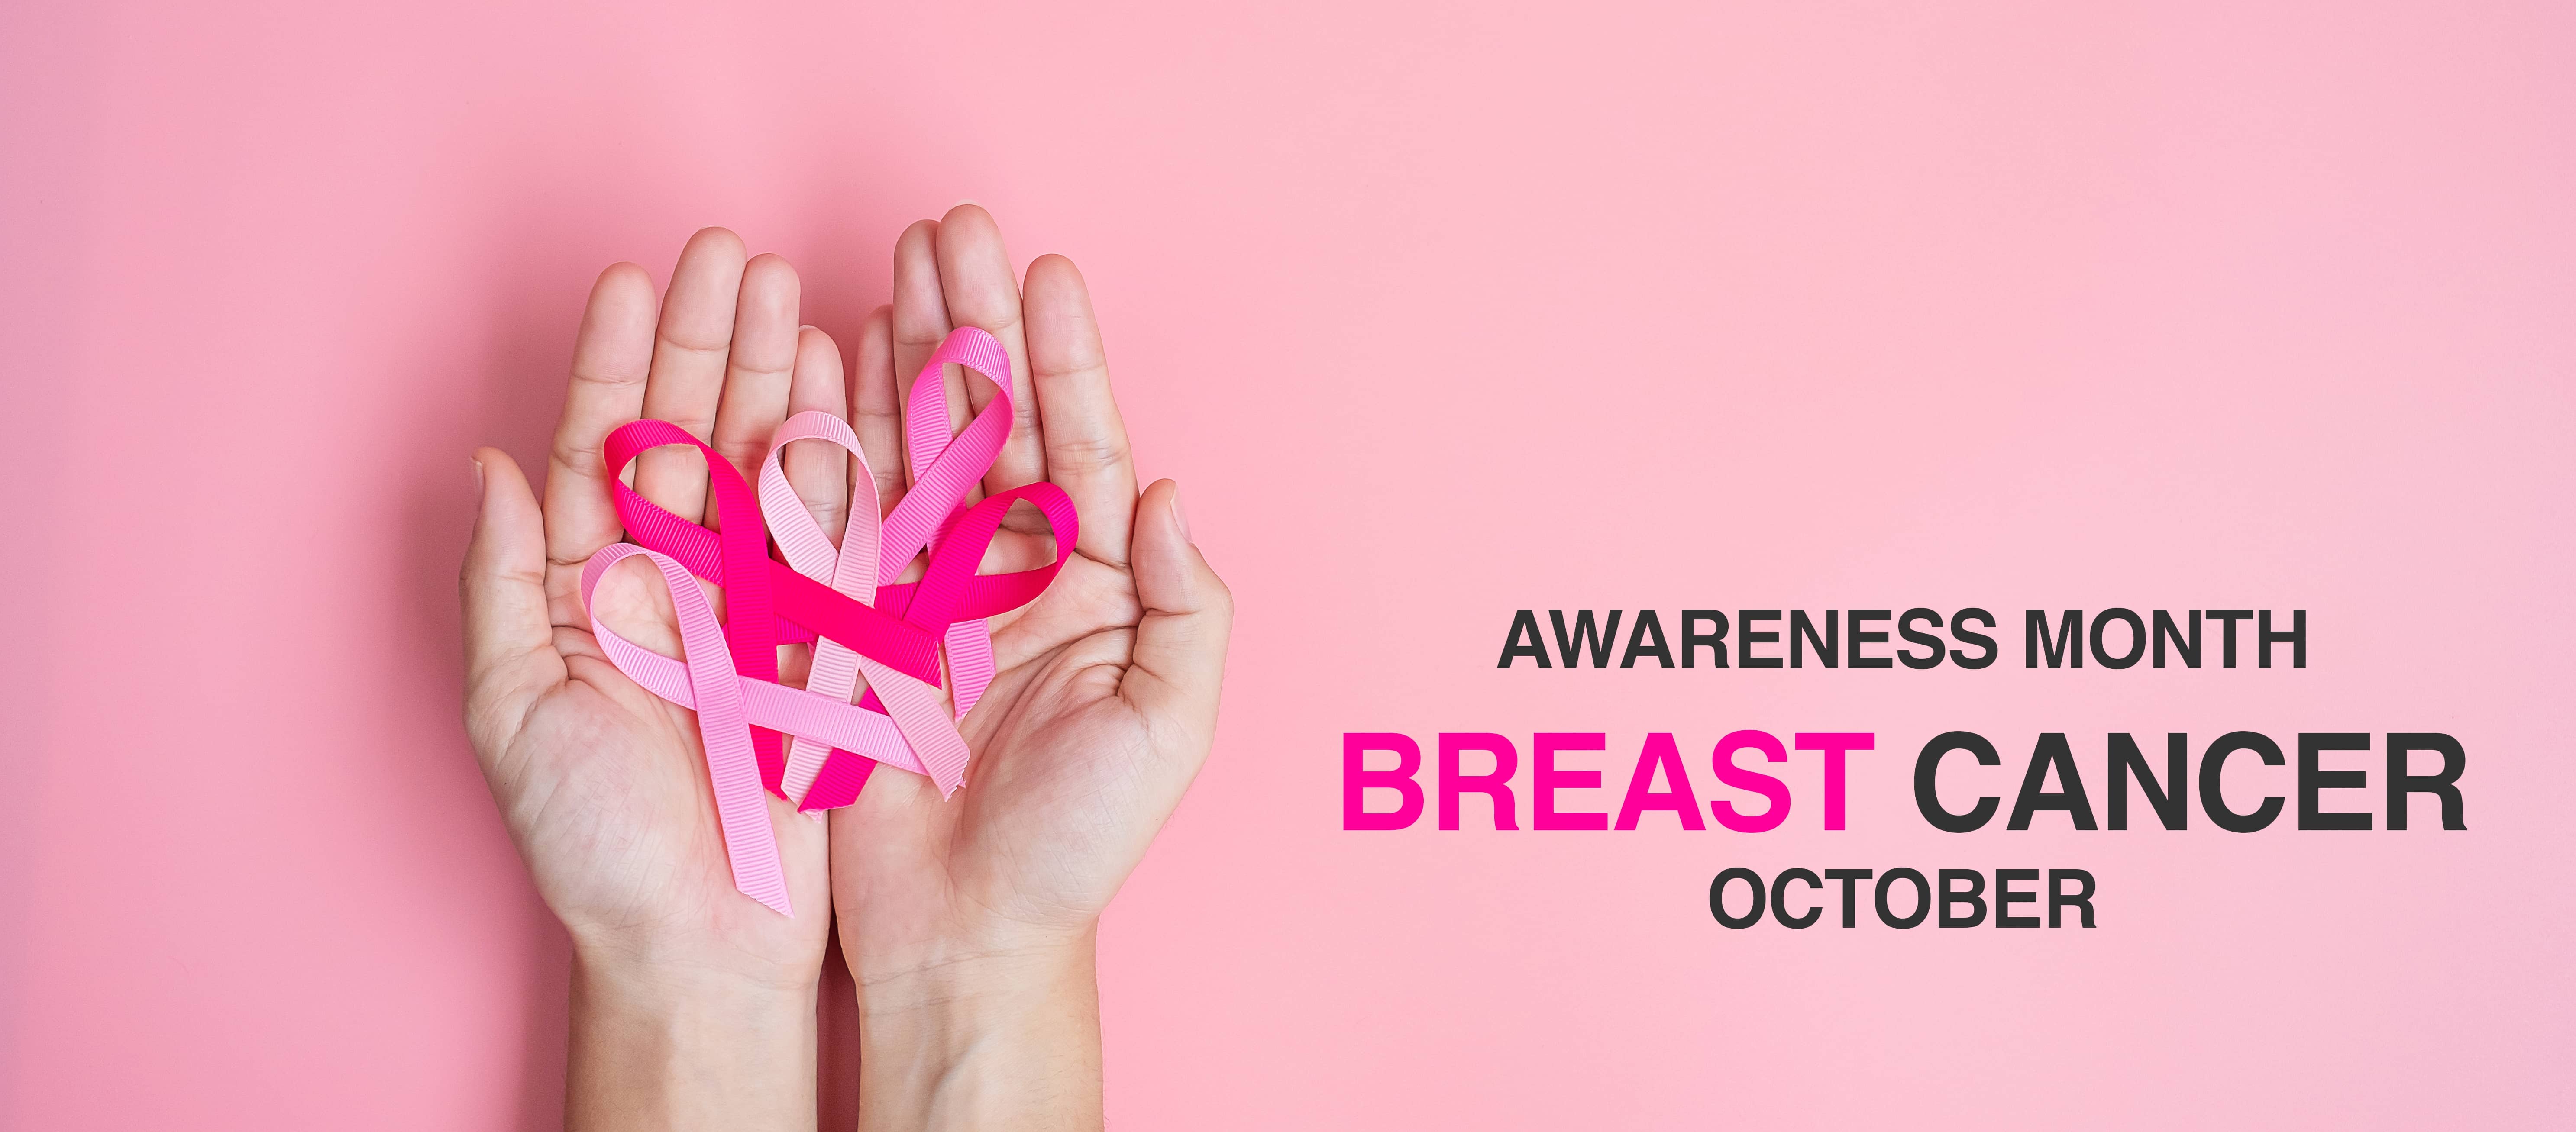 october-breast-cancer-awareness-month-adult-woman-hand-holding